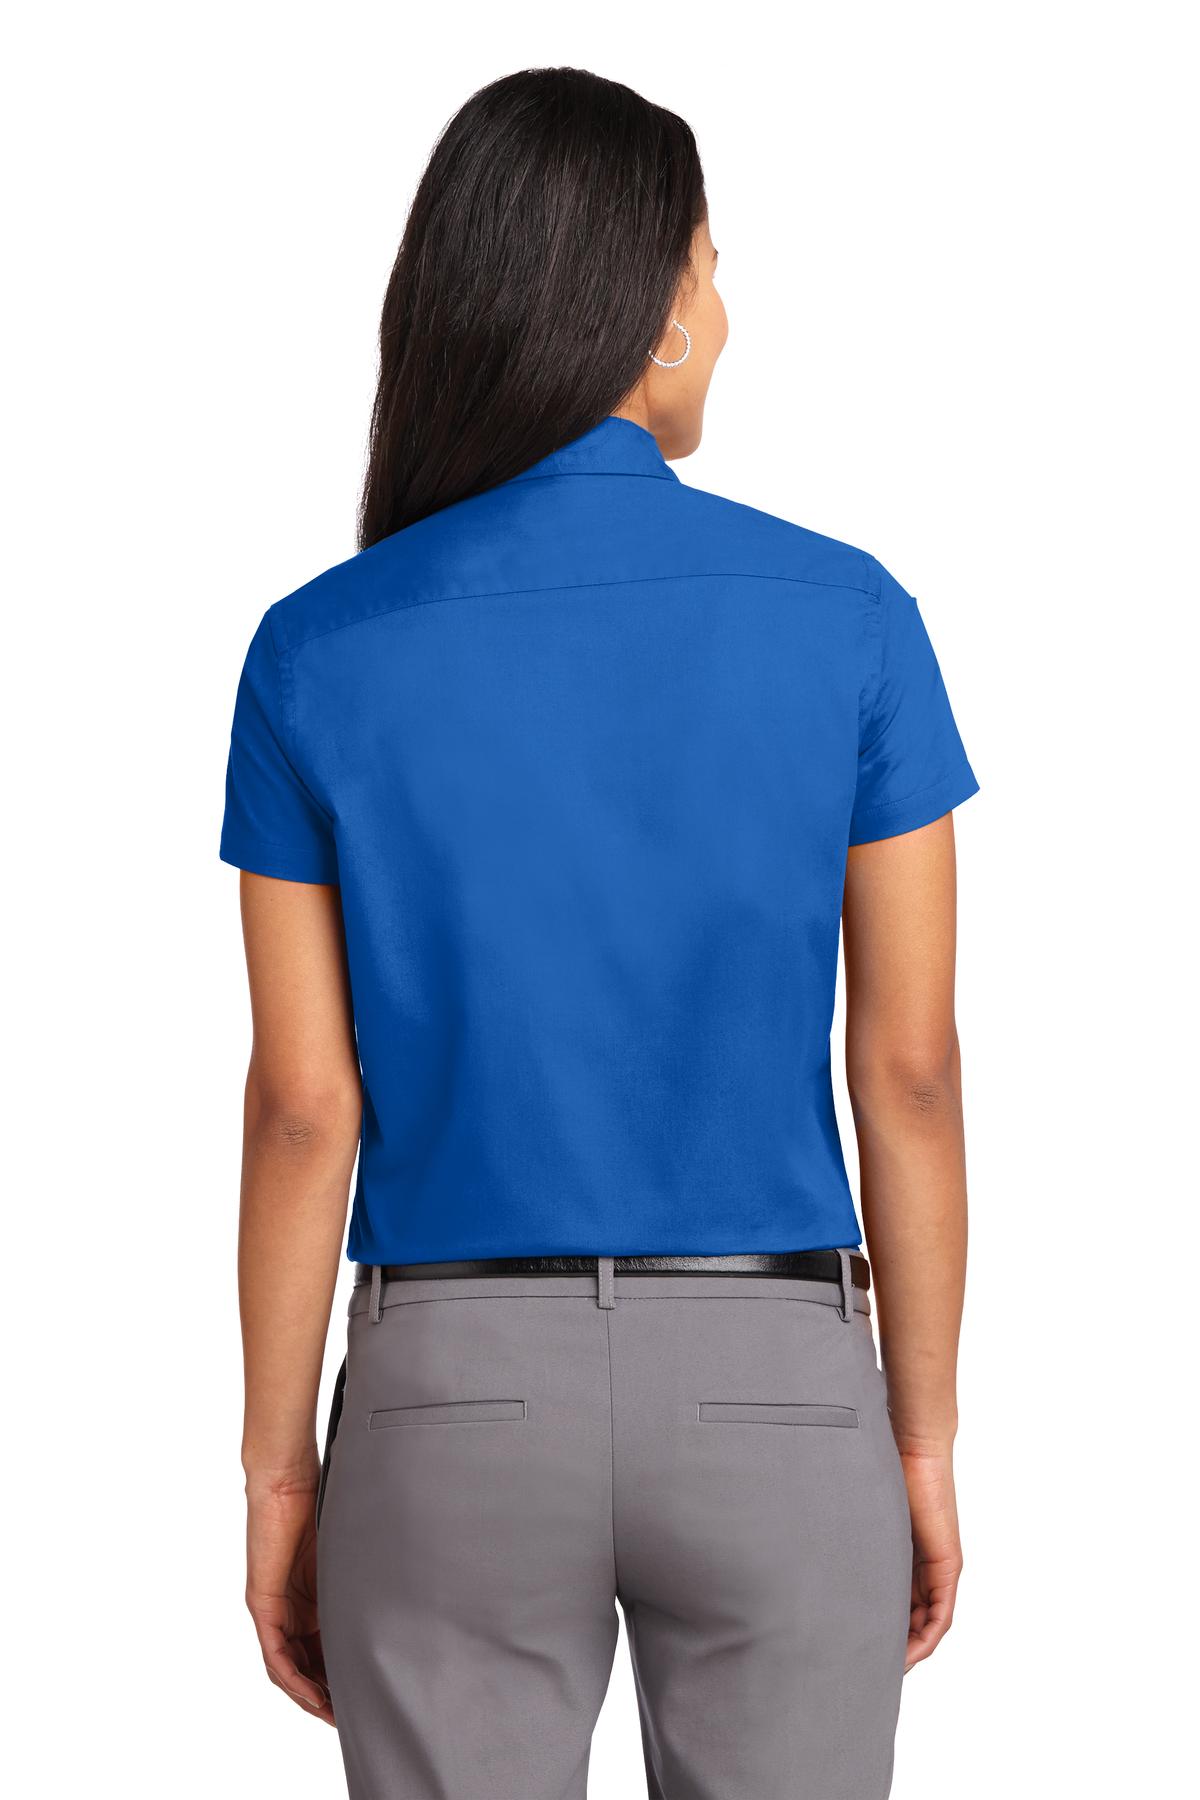 Port Authority® Ladies Short Sleeve Easy Care Shirt. L508 [Strong Blue] - DFW Impression